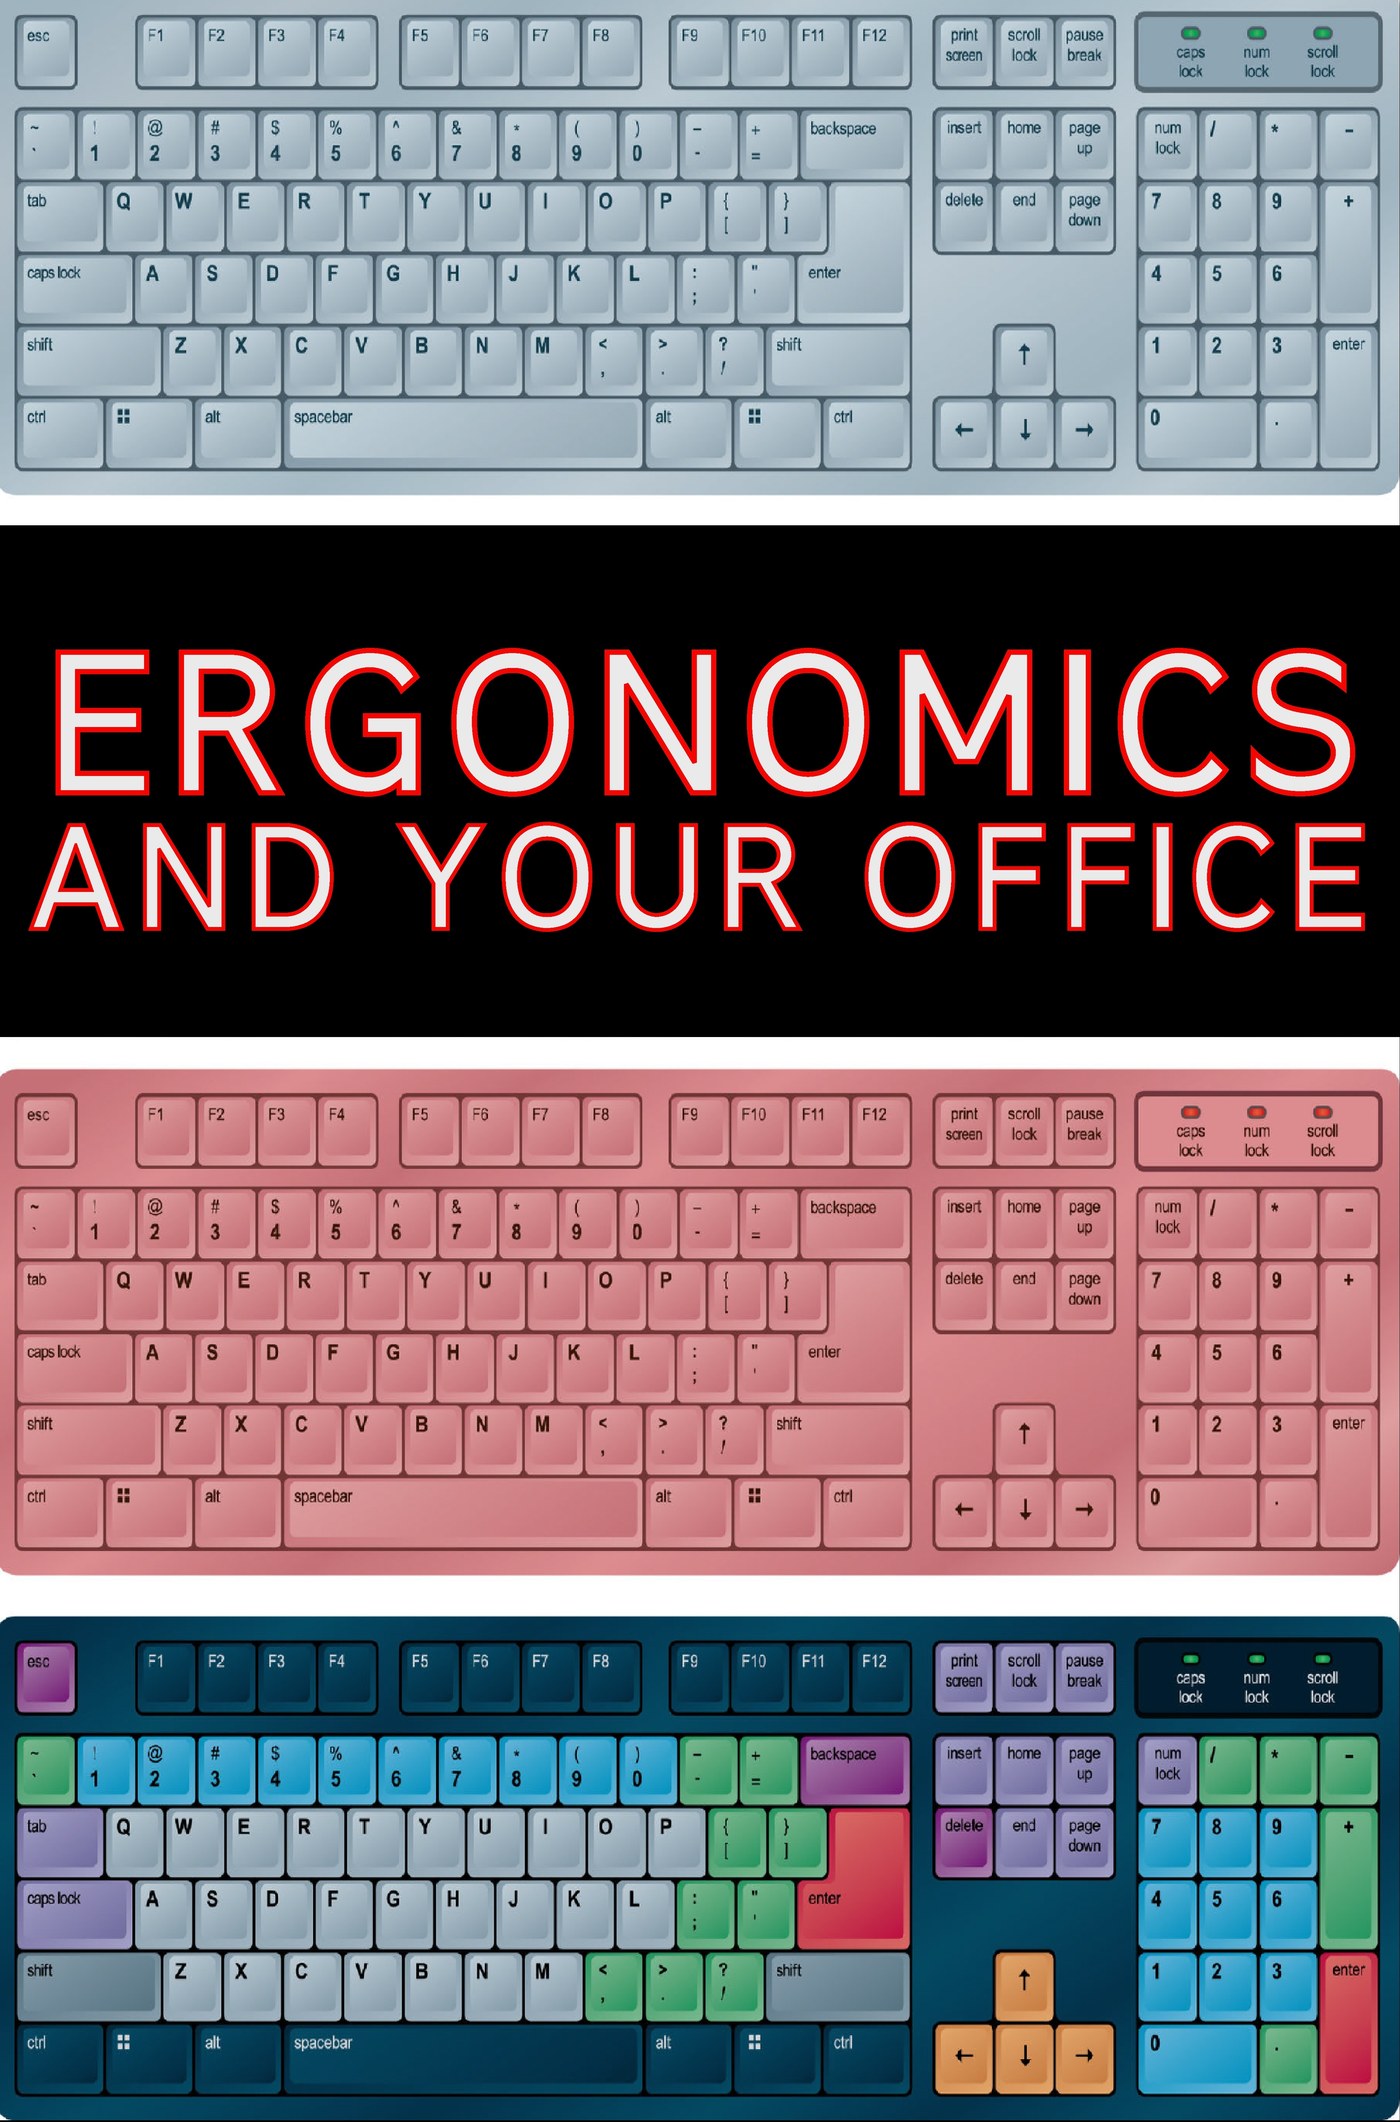 L7056 - Ergonomics and Your Office